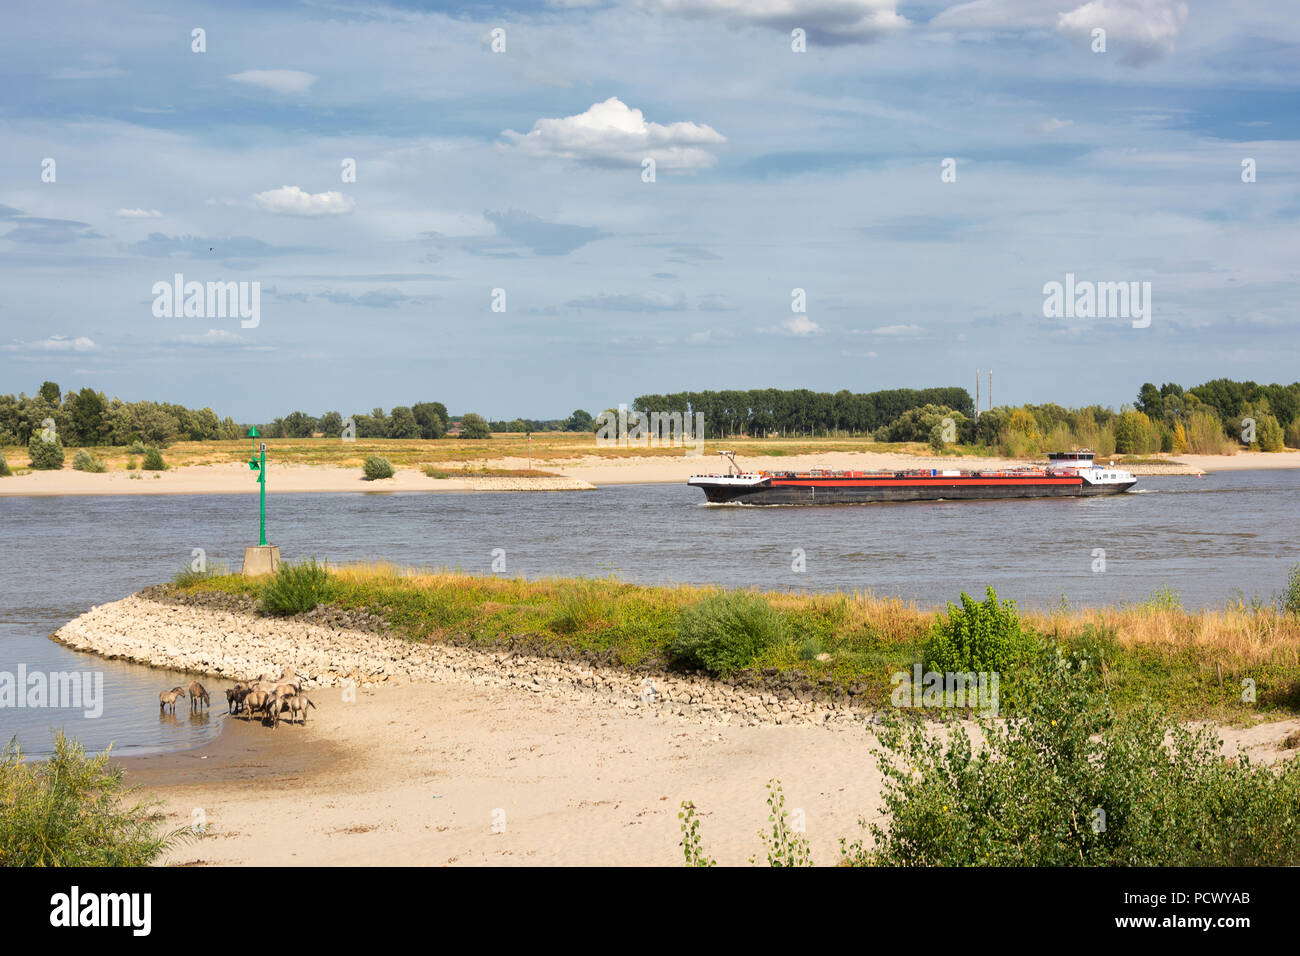 View on the river Waal and the Millingerwaard, near Nijmegen, the Netherlands. A contrast between modern transportation and wildlife (konikhorses) Stock Photo